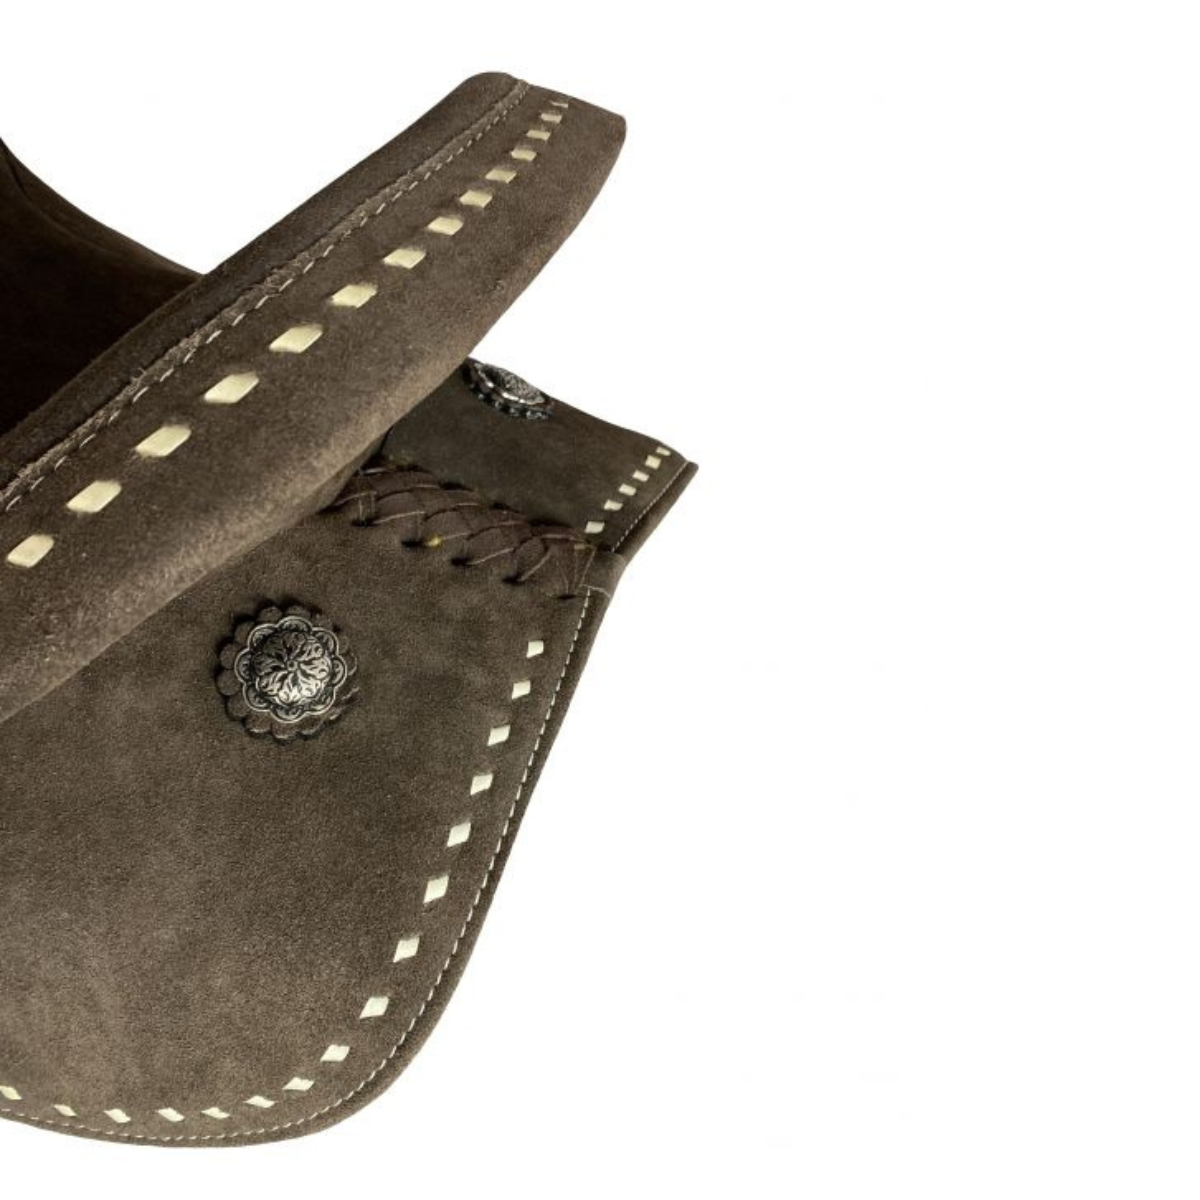 12" Double T Barrel style saddle with Dark Brown Rough out leather - Double T Saddles